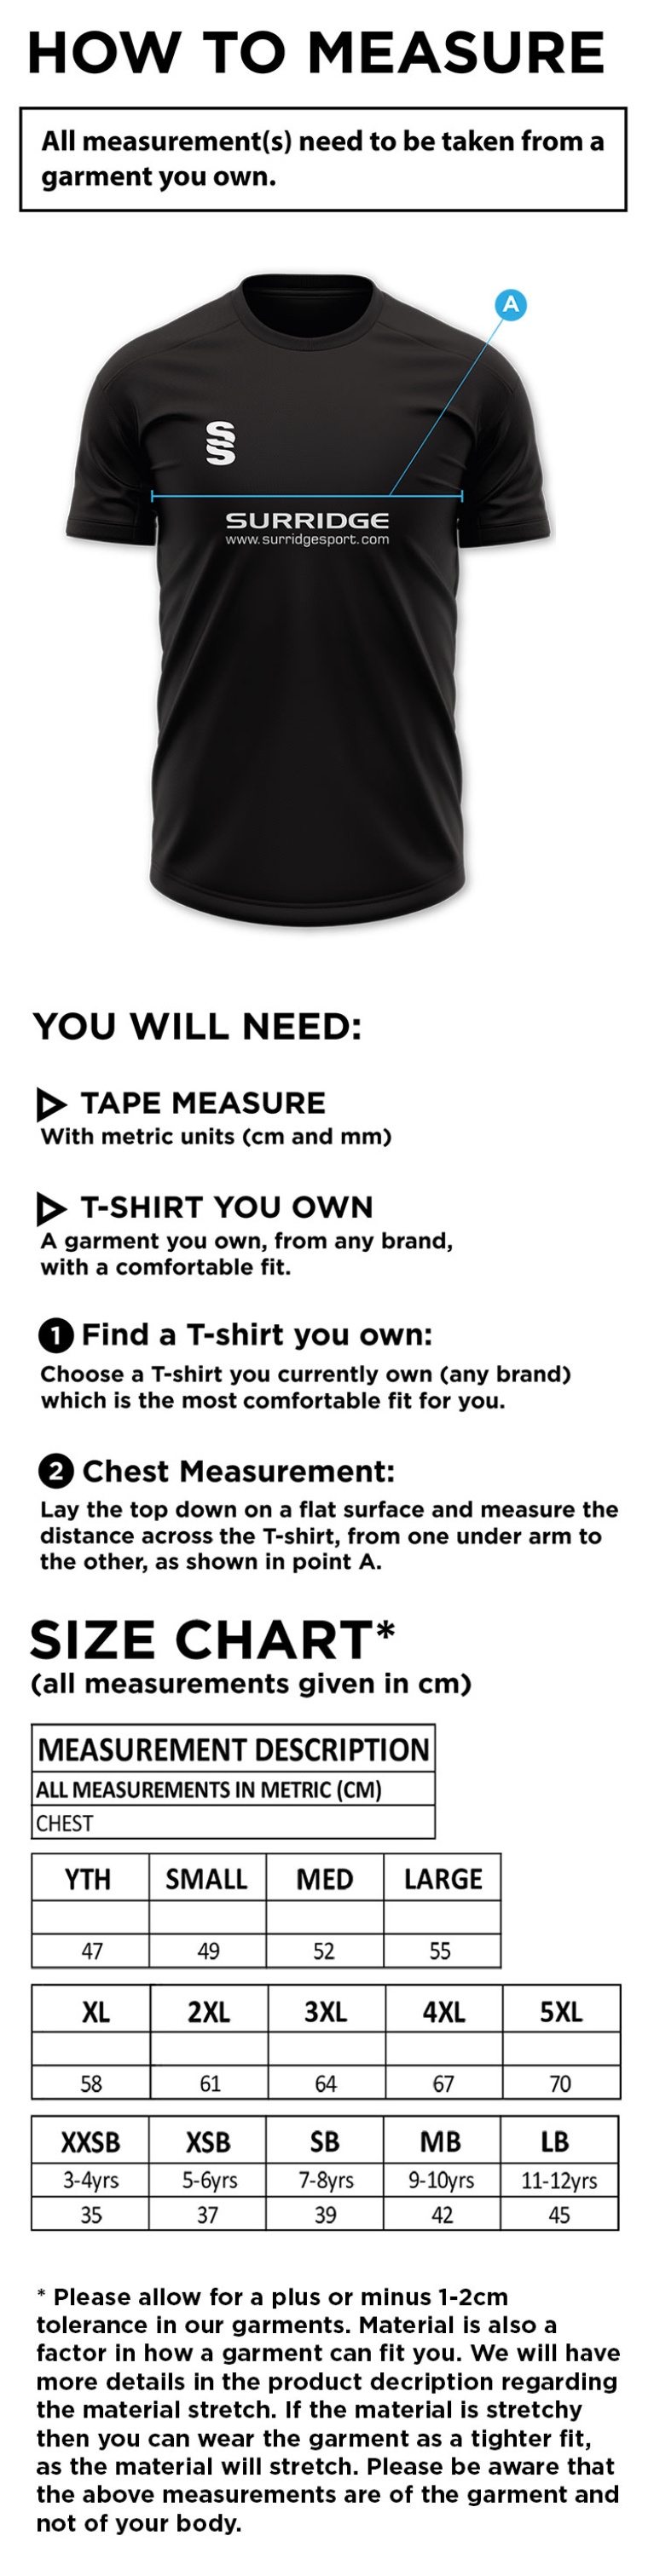 Youth's Camo Games Shirt : Red - Size Guide